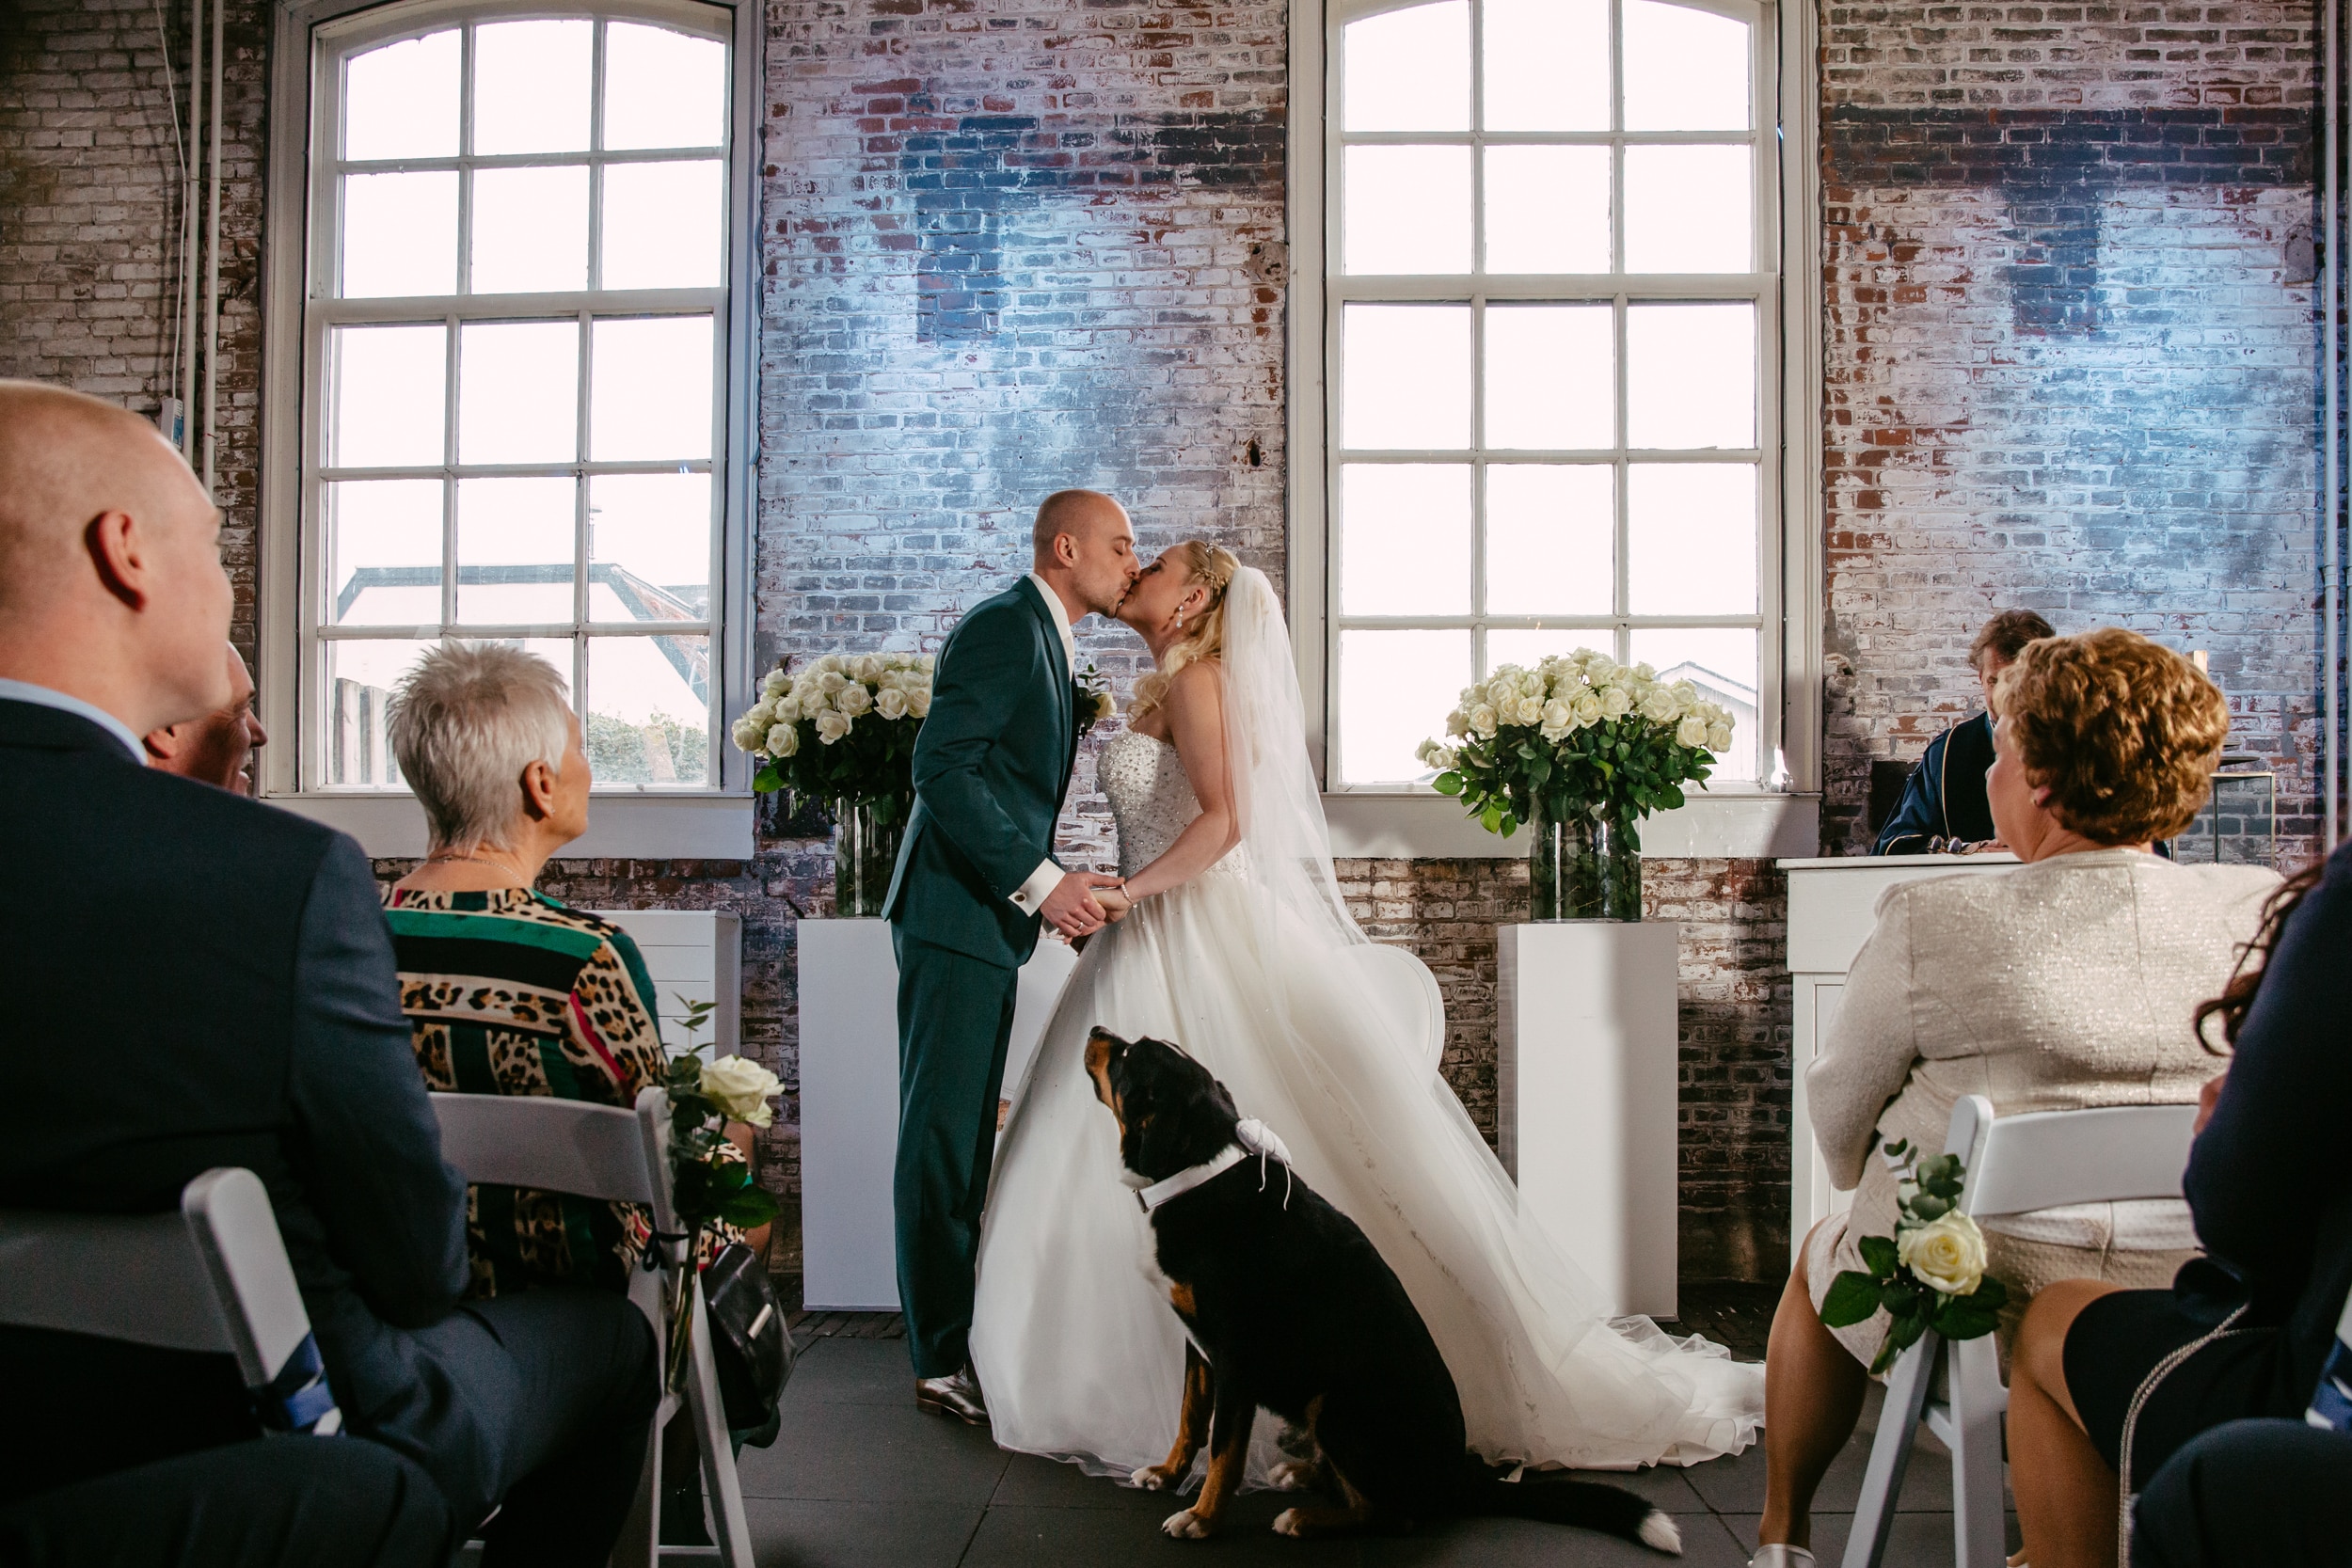 A bride and groom share a loving kiss during their wedding ceremony at one of South Holland's beautiful wedding venues.